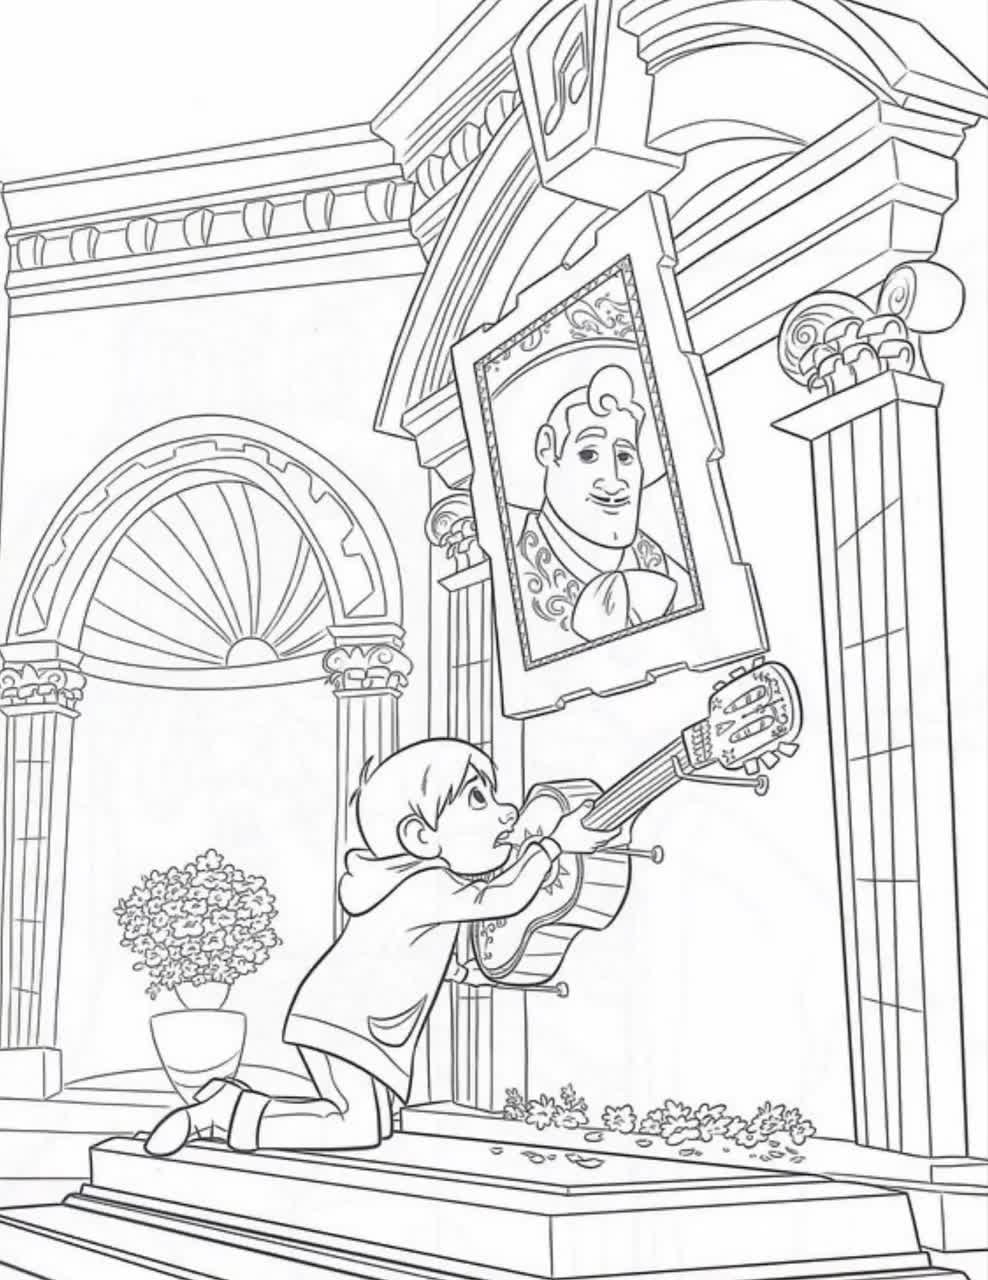 Coco printable coloring pages